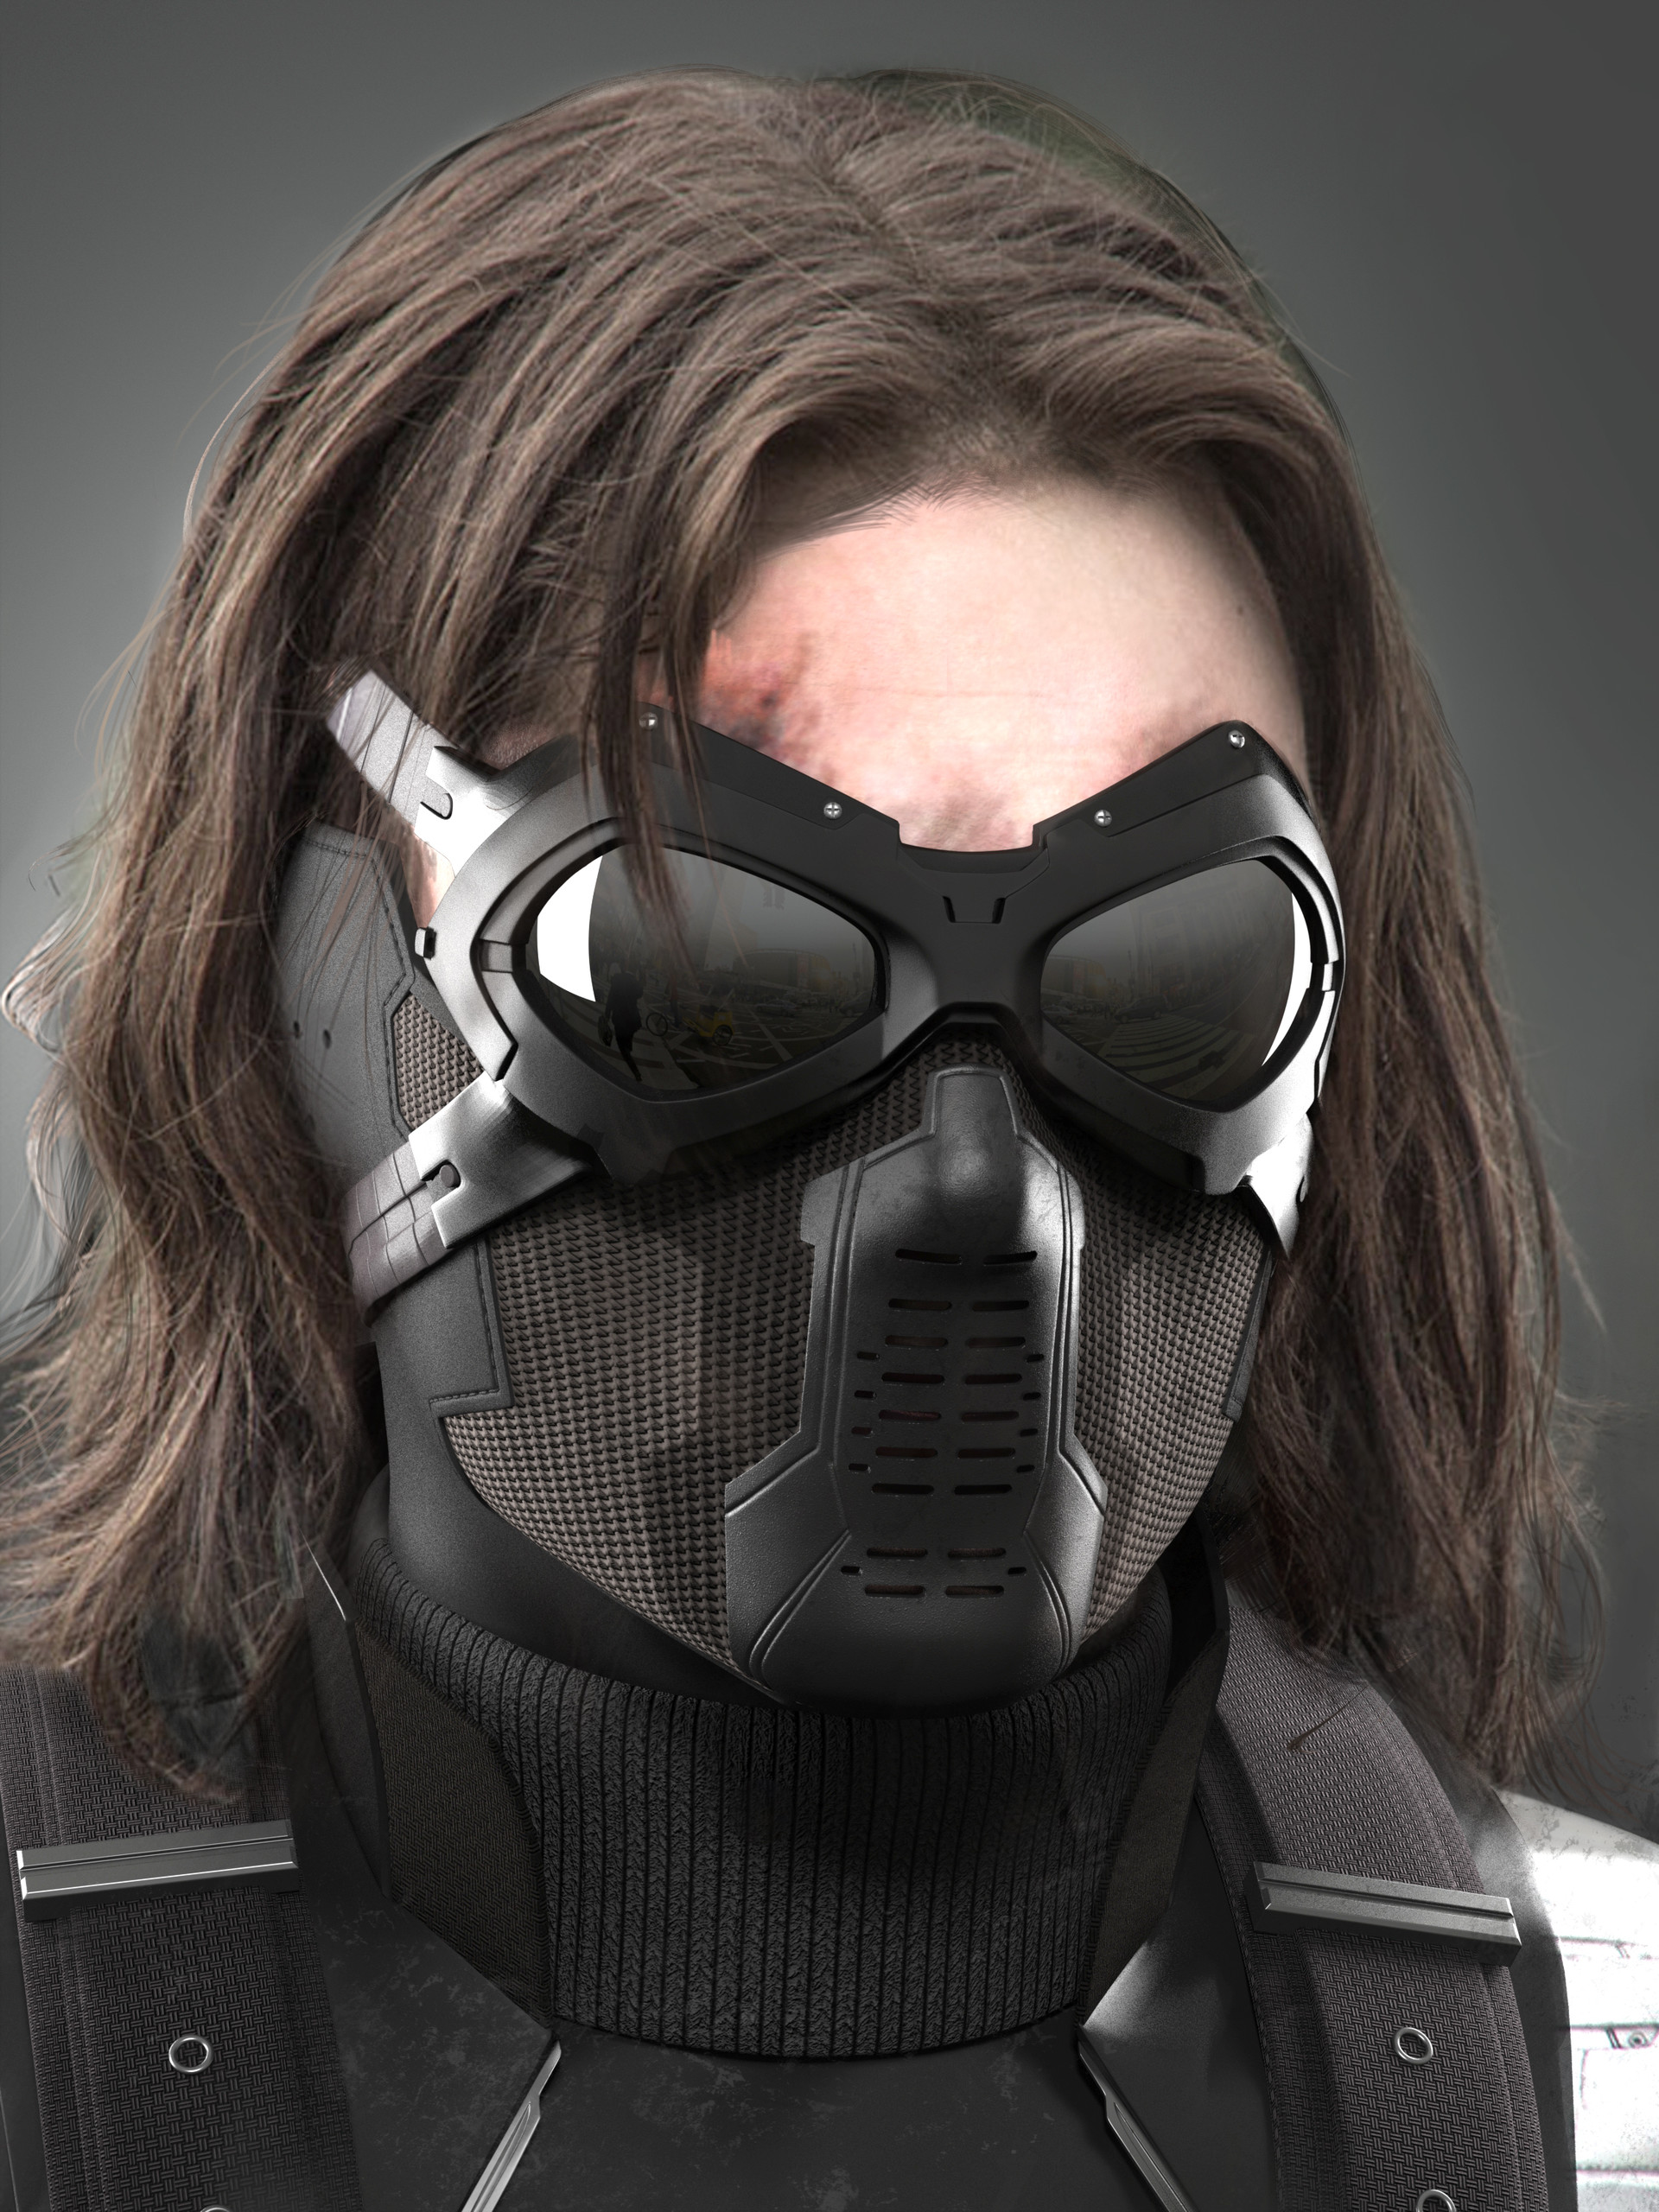 This is the model I created for the mask and goggles made for "Cap...